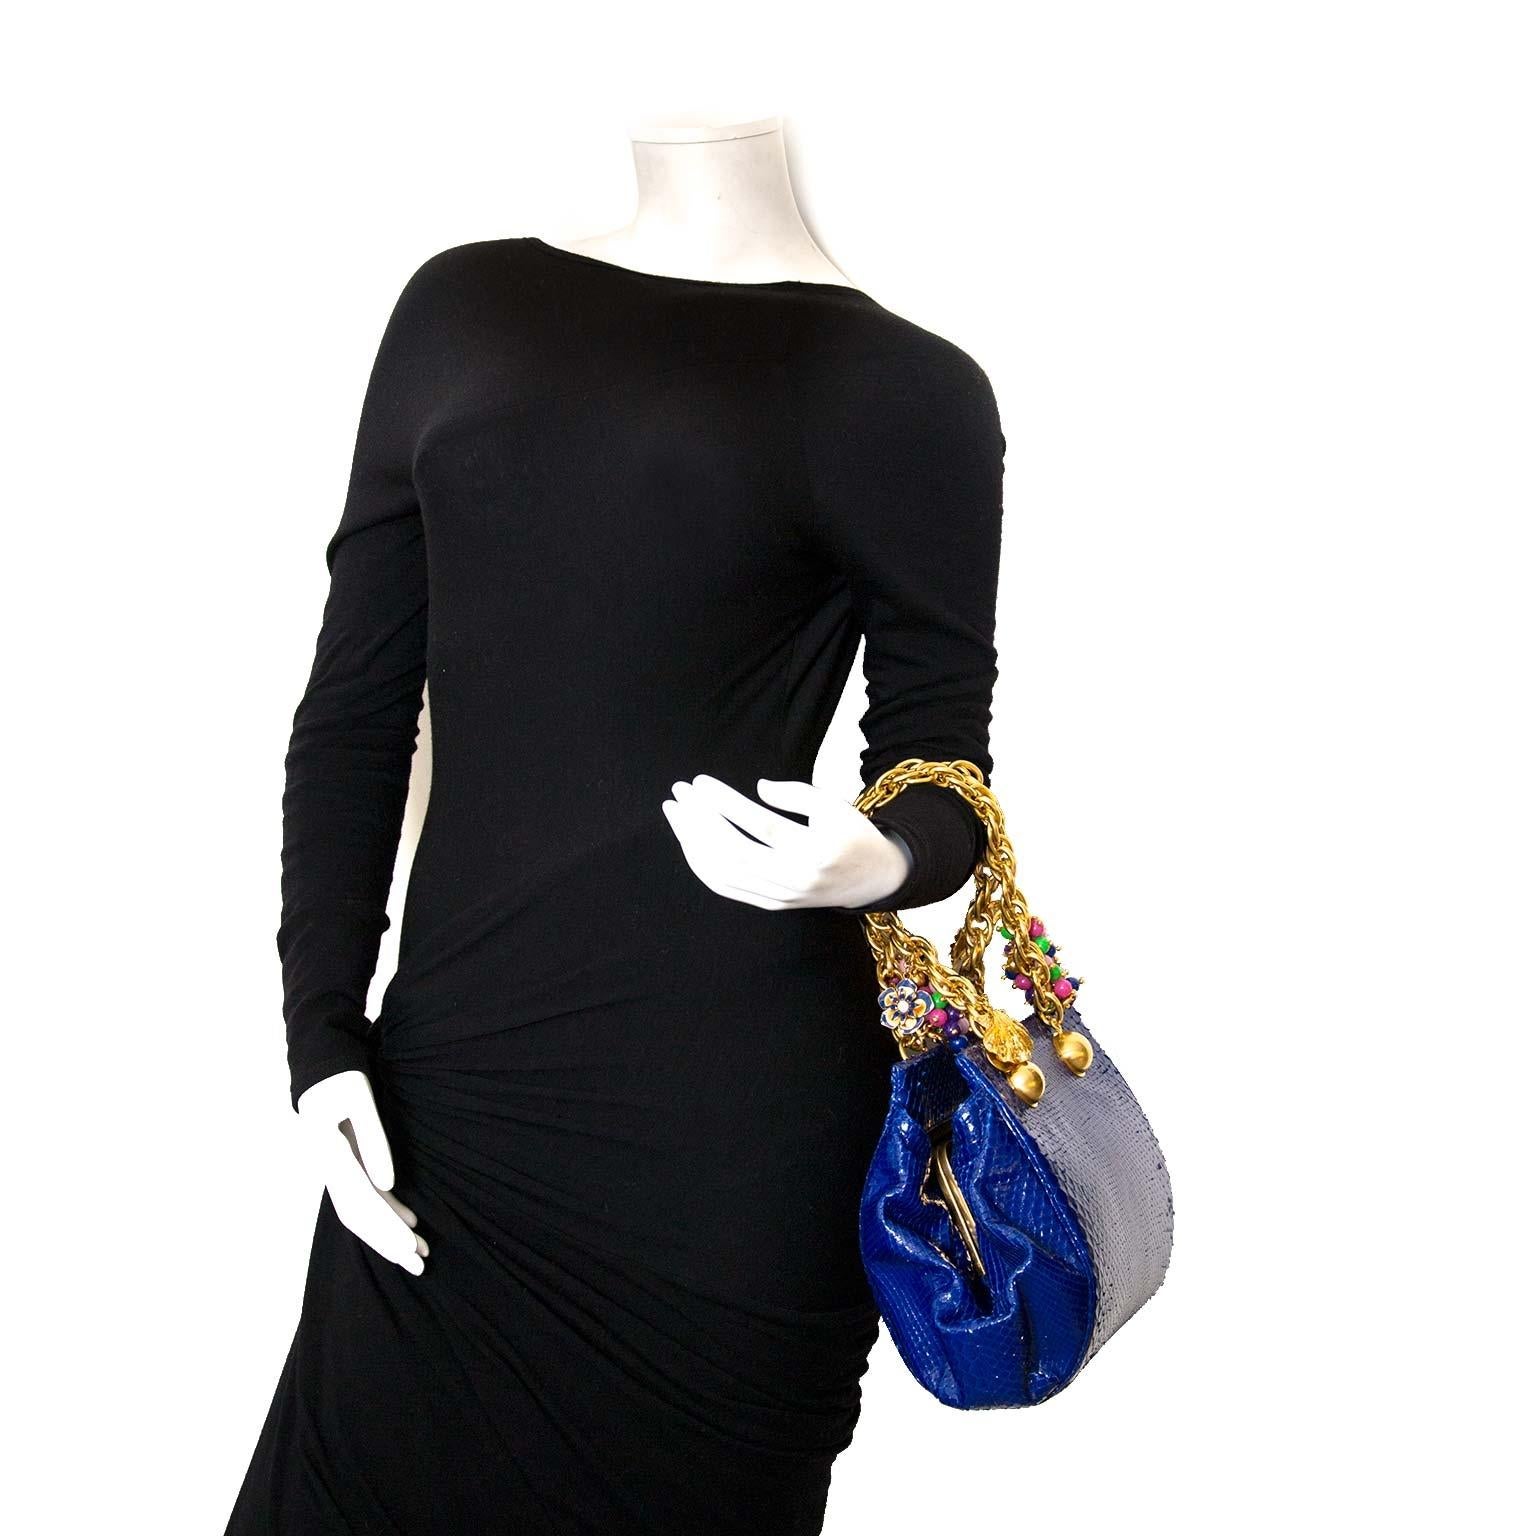 Very good condition

Versace Blue Python Gold Chain Bag

This true statement-piece by Versace will blow you away. The bag is made from bright blue python leather and features a gold chain complete with little ornaments in the shape of flowers,